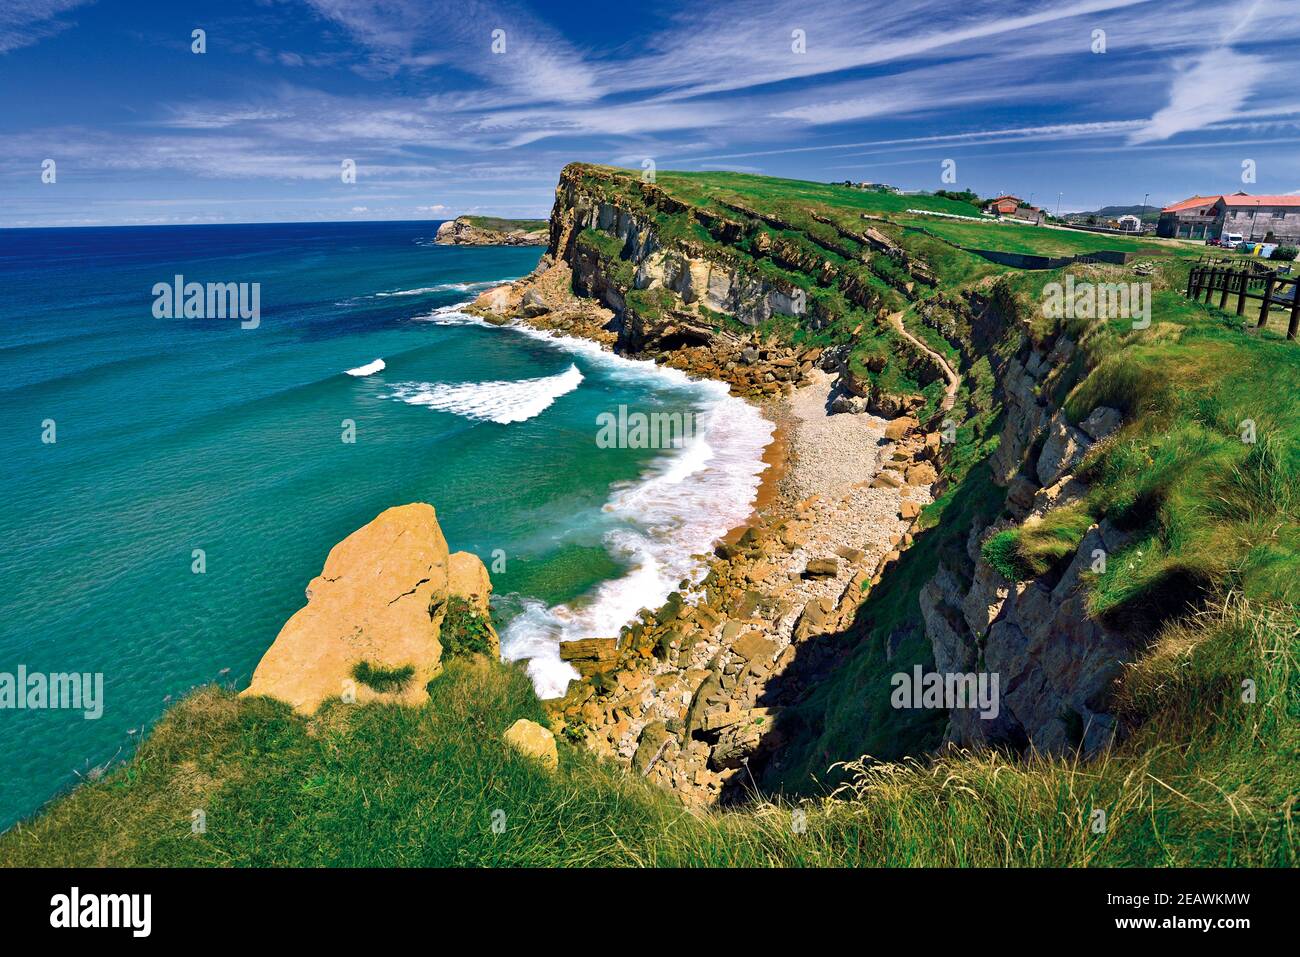 Great coastal view with wild beach, green ocean and cliffs and blue sky, Stock Photo